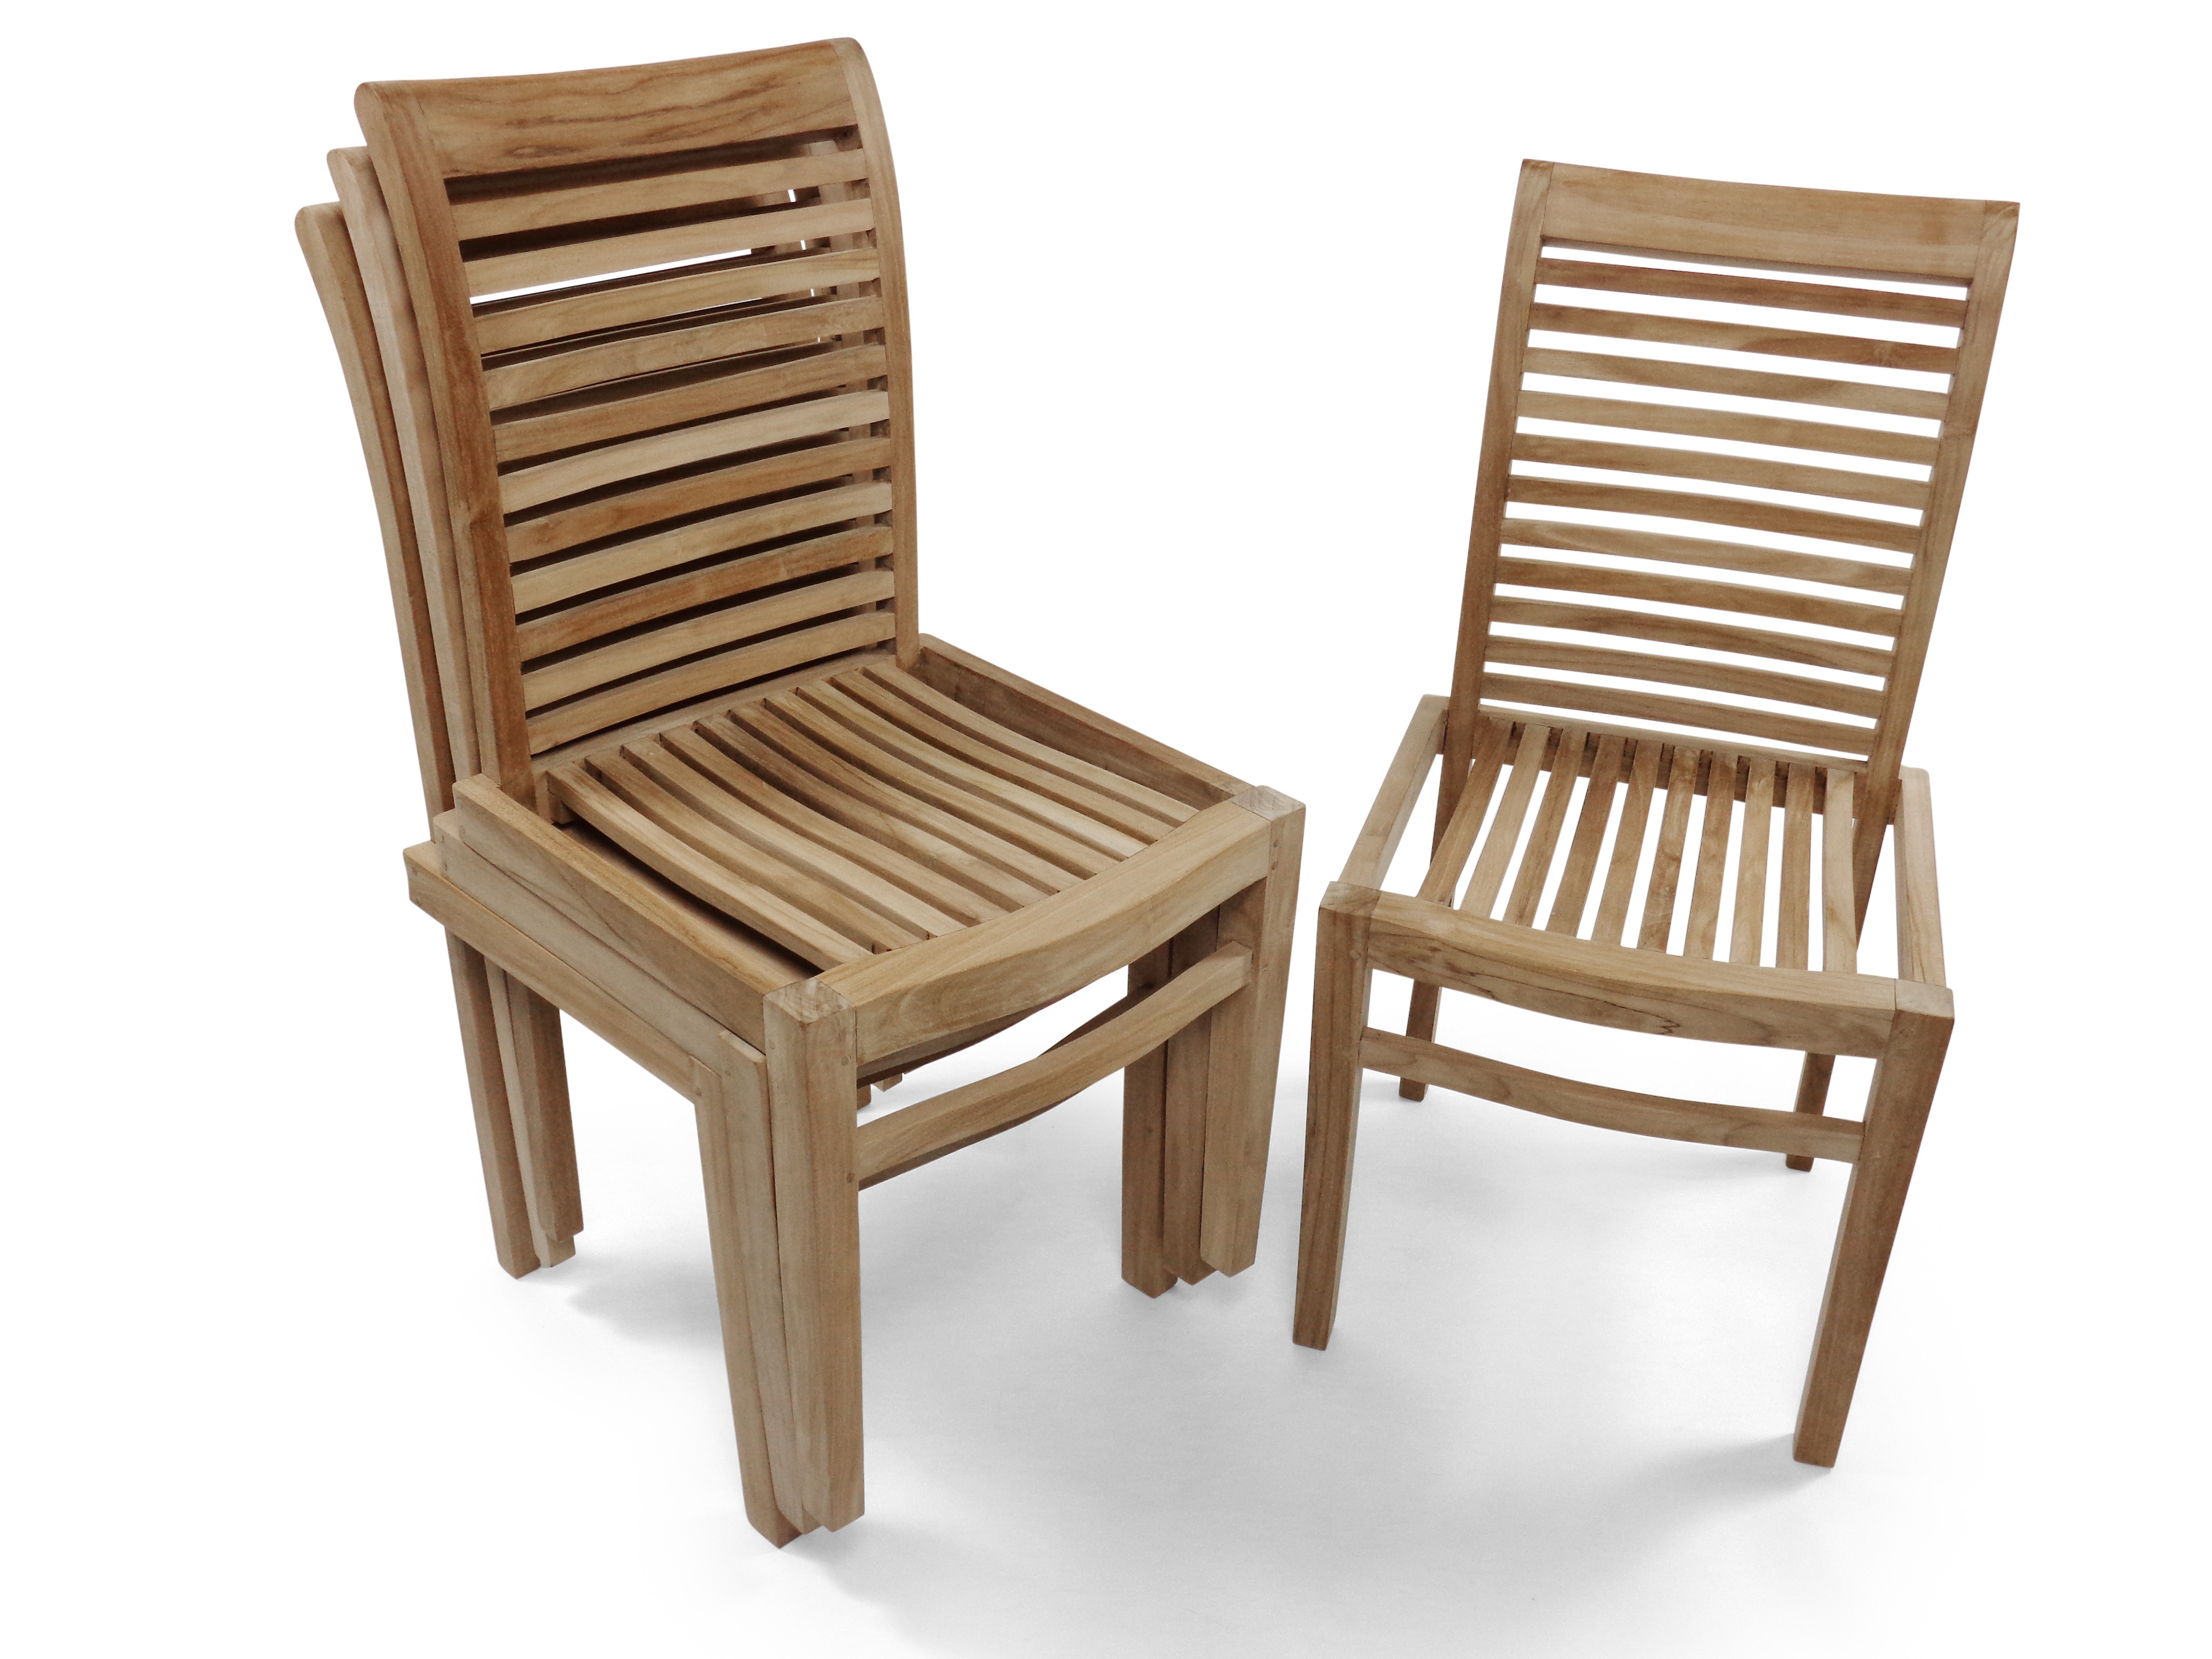 Casa Blanca Armless Teak Stacking Chair w Comfortable Contoured Seats, Packed and Price 4 per Box. Assembled.